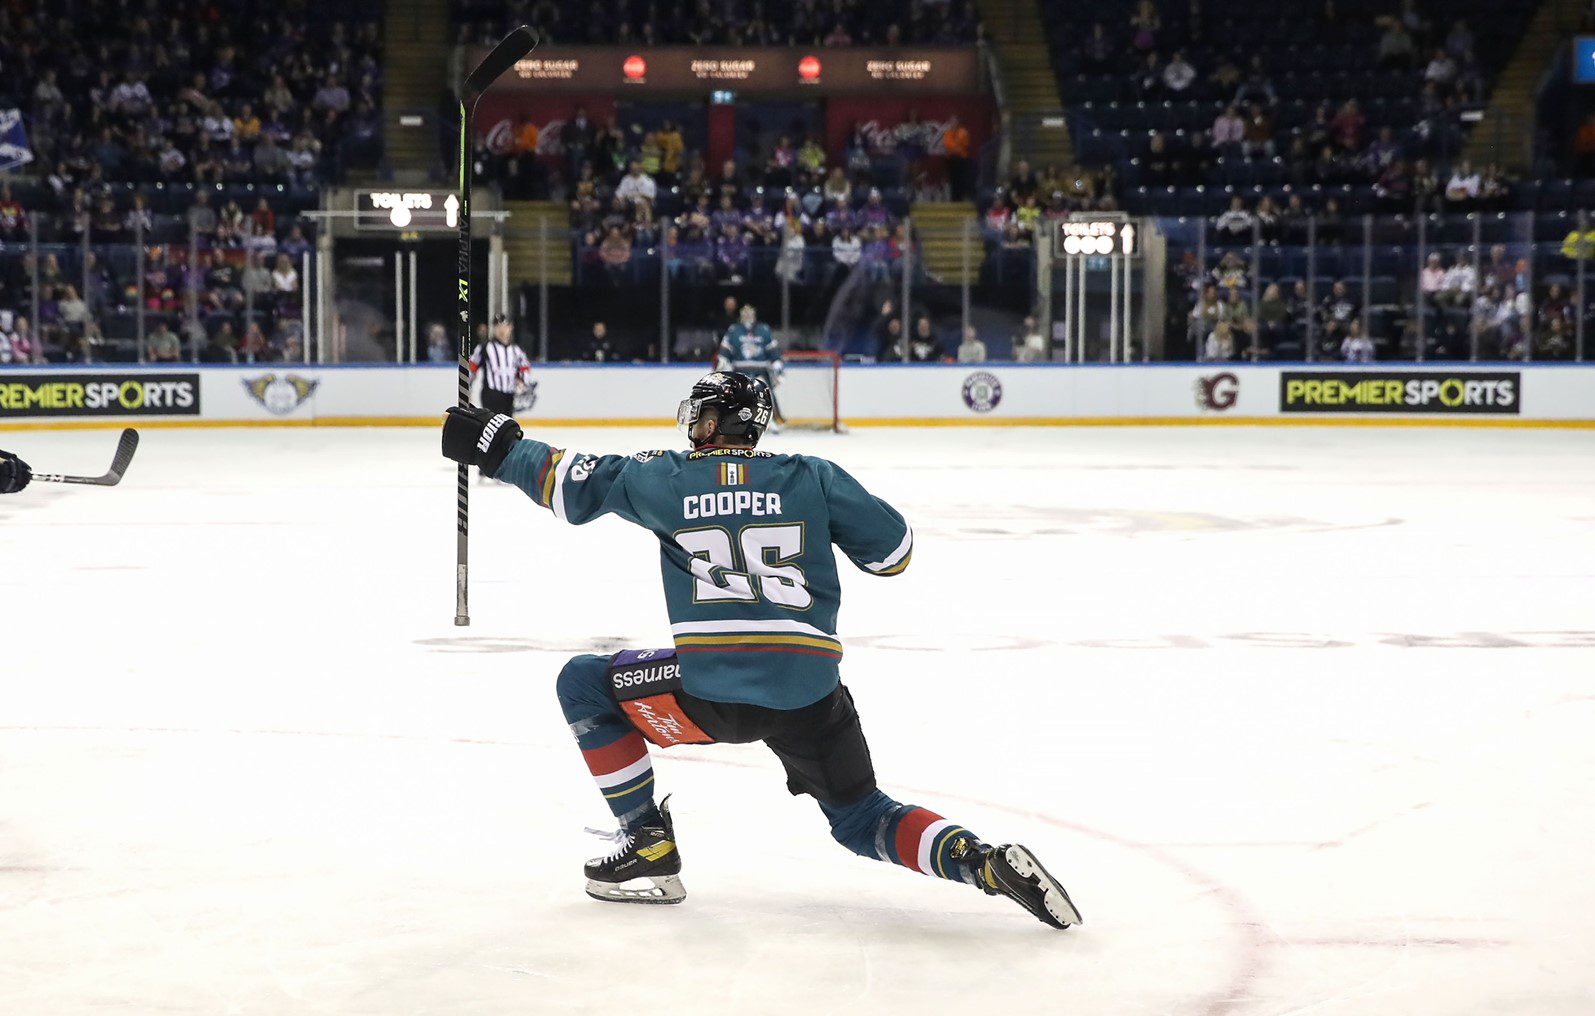 Mark Cooper notched a remarkable hattrick to send the Belfast Giants to the 2021-22 Elite League Playoff Final (Image: William Cherry)